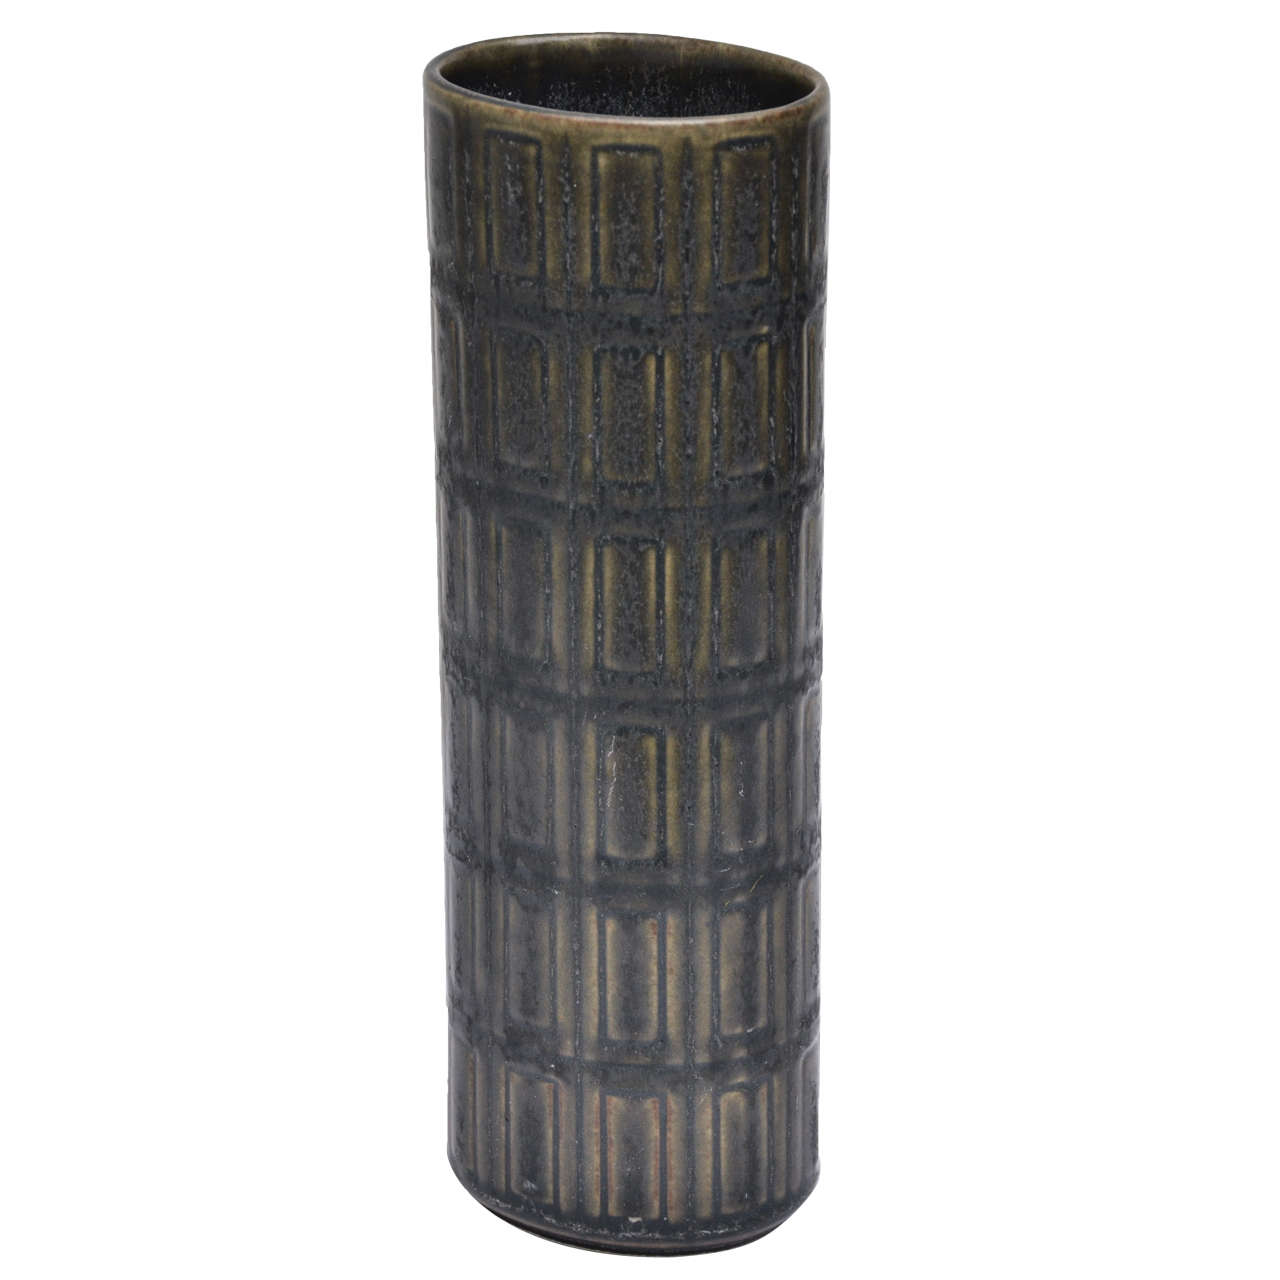 Tall Scandinavian Vase with Graphic Imprinted Design